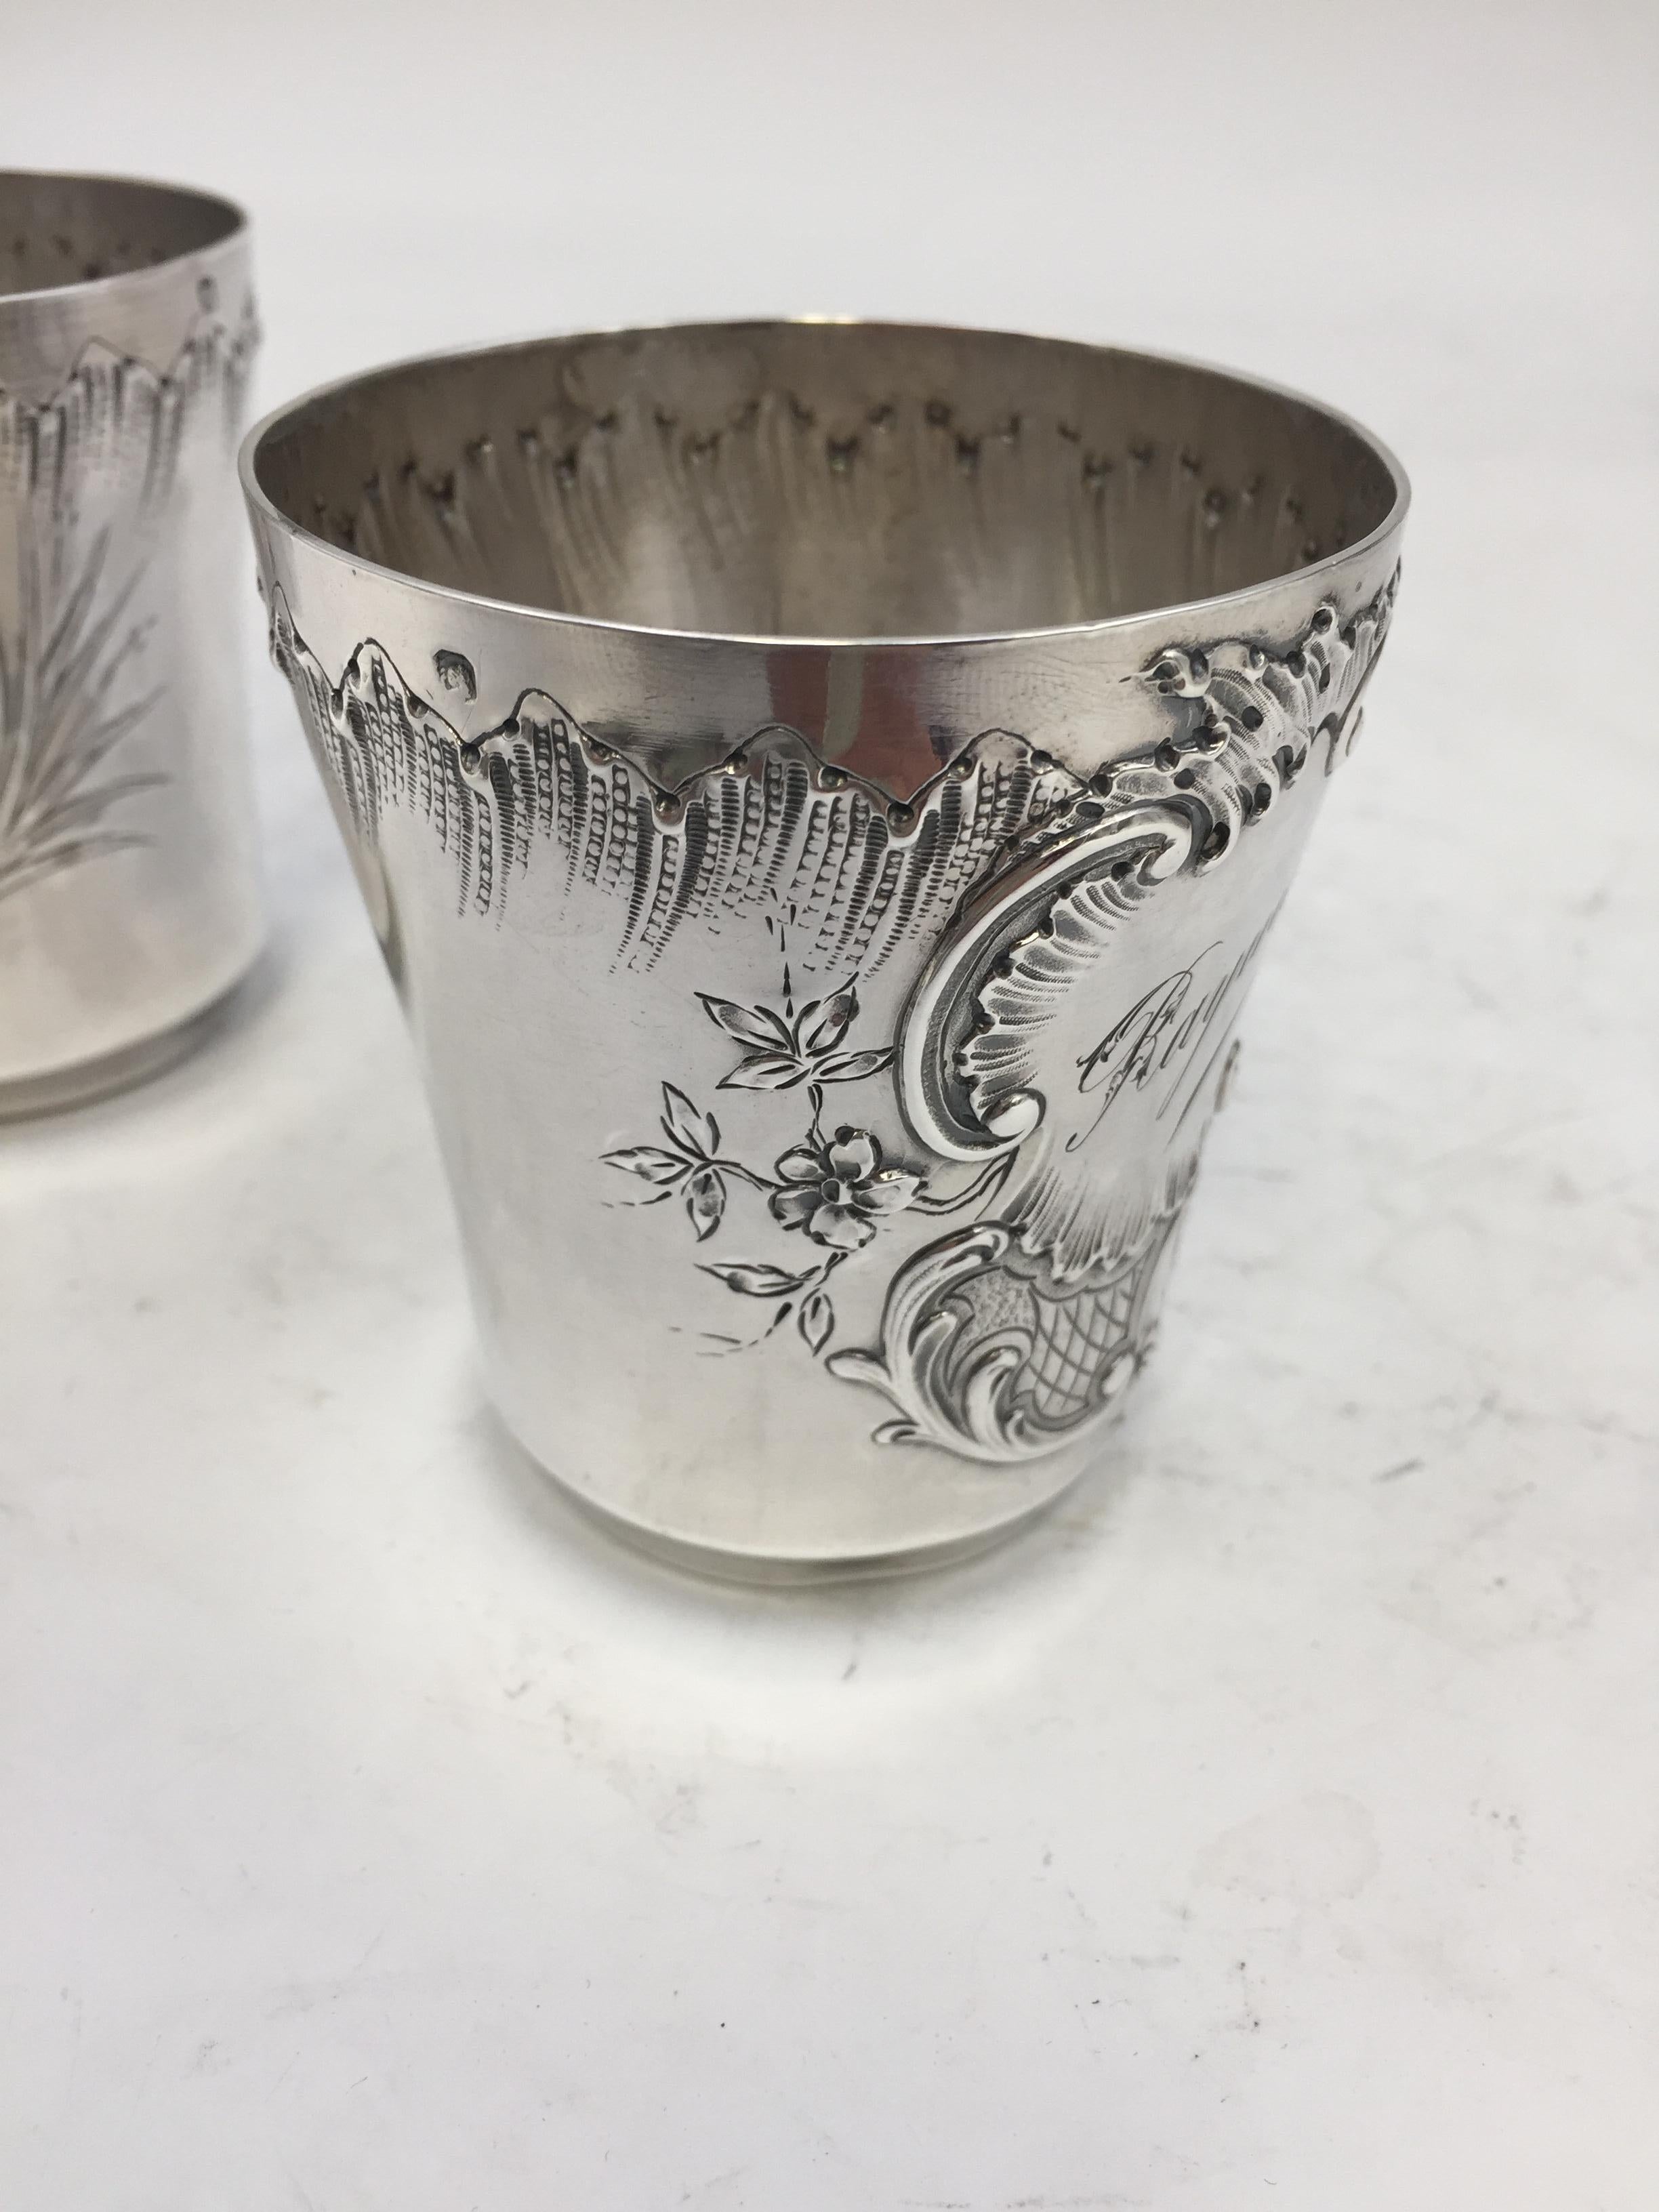 Pair of French silver Kiddush cups with ornate engravings and inscriptions measuring 2 3/4'' in diameter and weighing 4.7 ozt total. Just imagine how these cups would instantly elevate your table. Comes from the estate of the secretary of the Duke